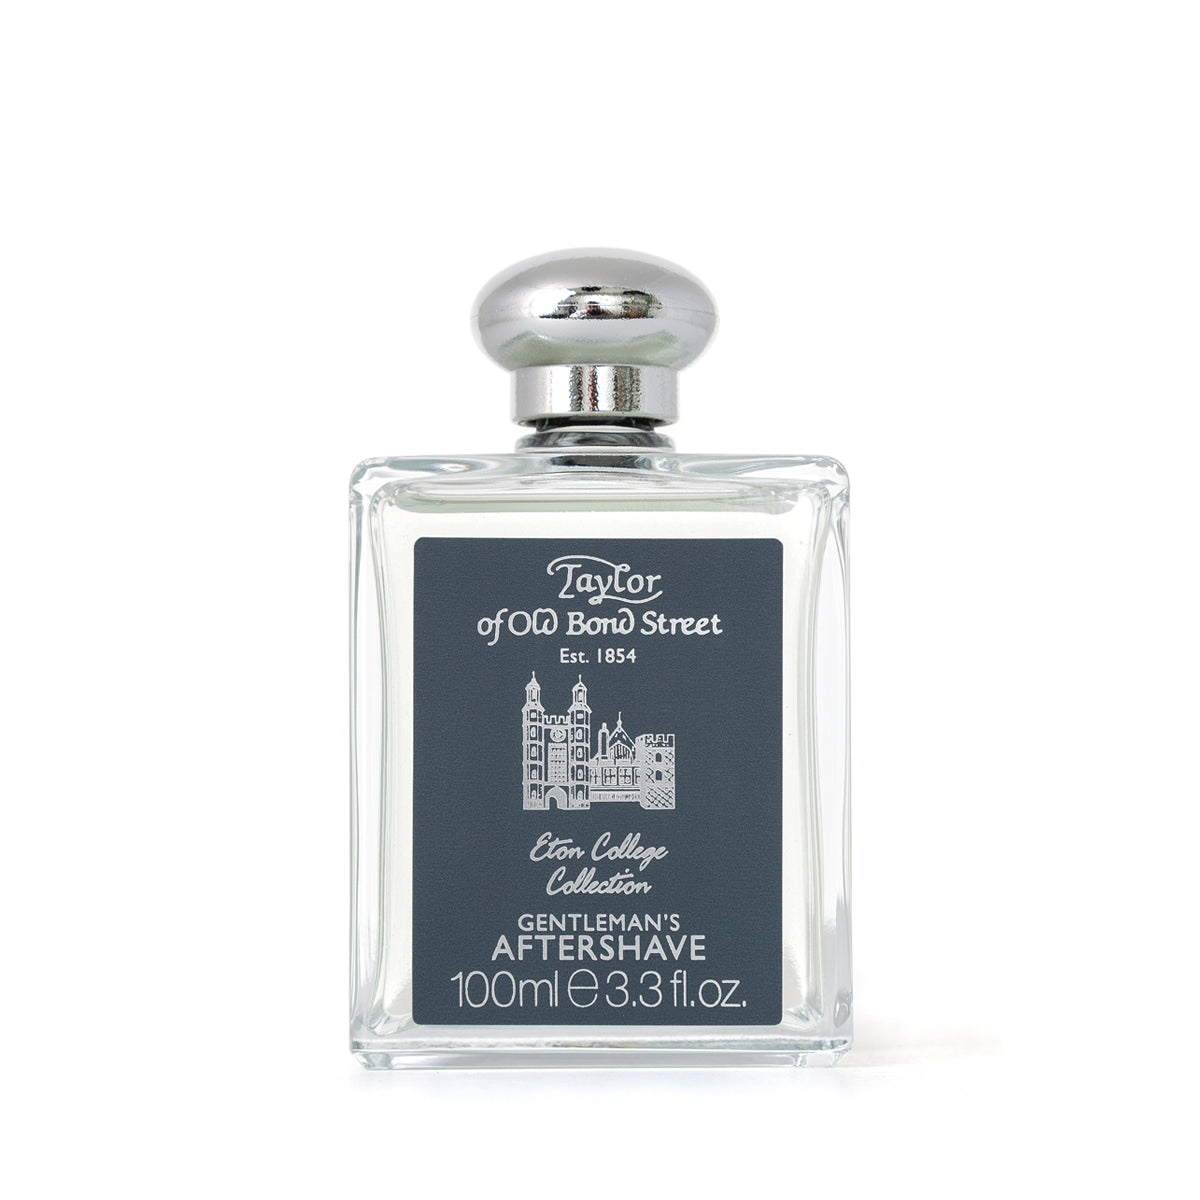 Eton College Collection Aftershave Lotion 100ml